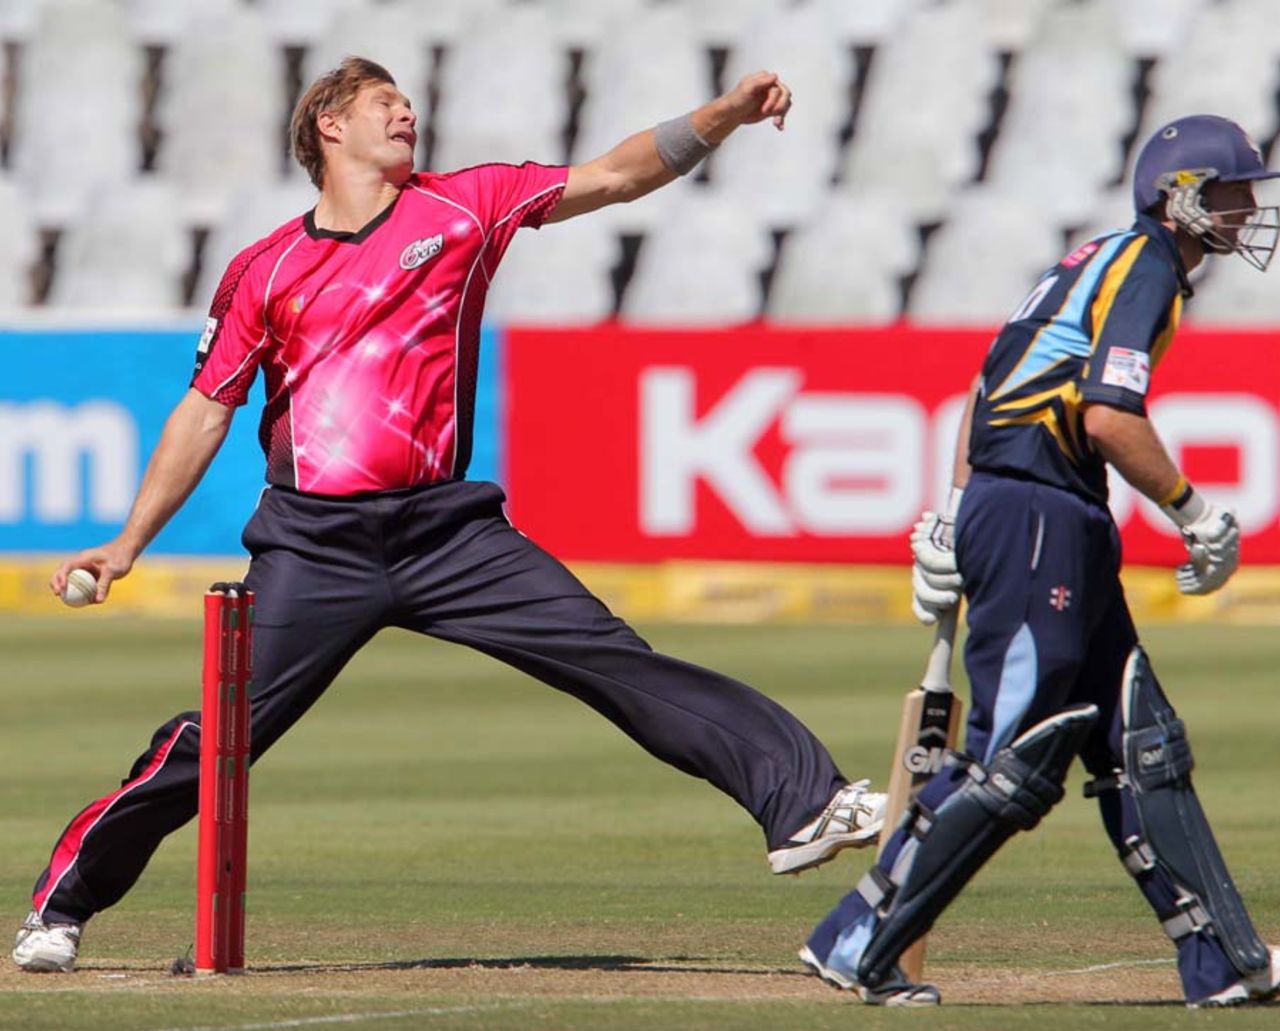 Shane Watson took two wickets, Sydney Sixers v Yorkshire, Group B, Champions League Twenty20, Cape Town, October 16, 2012